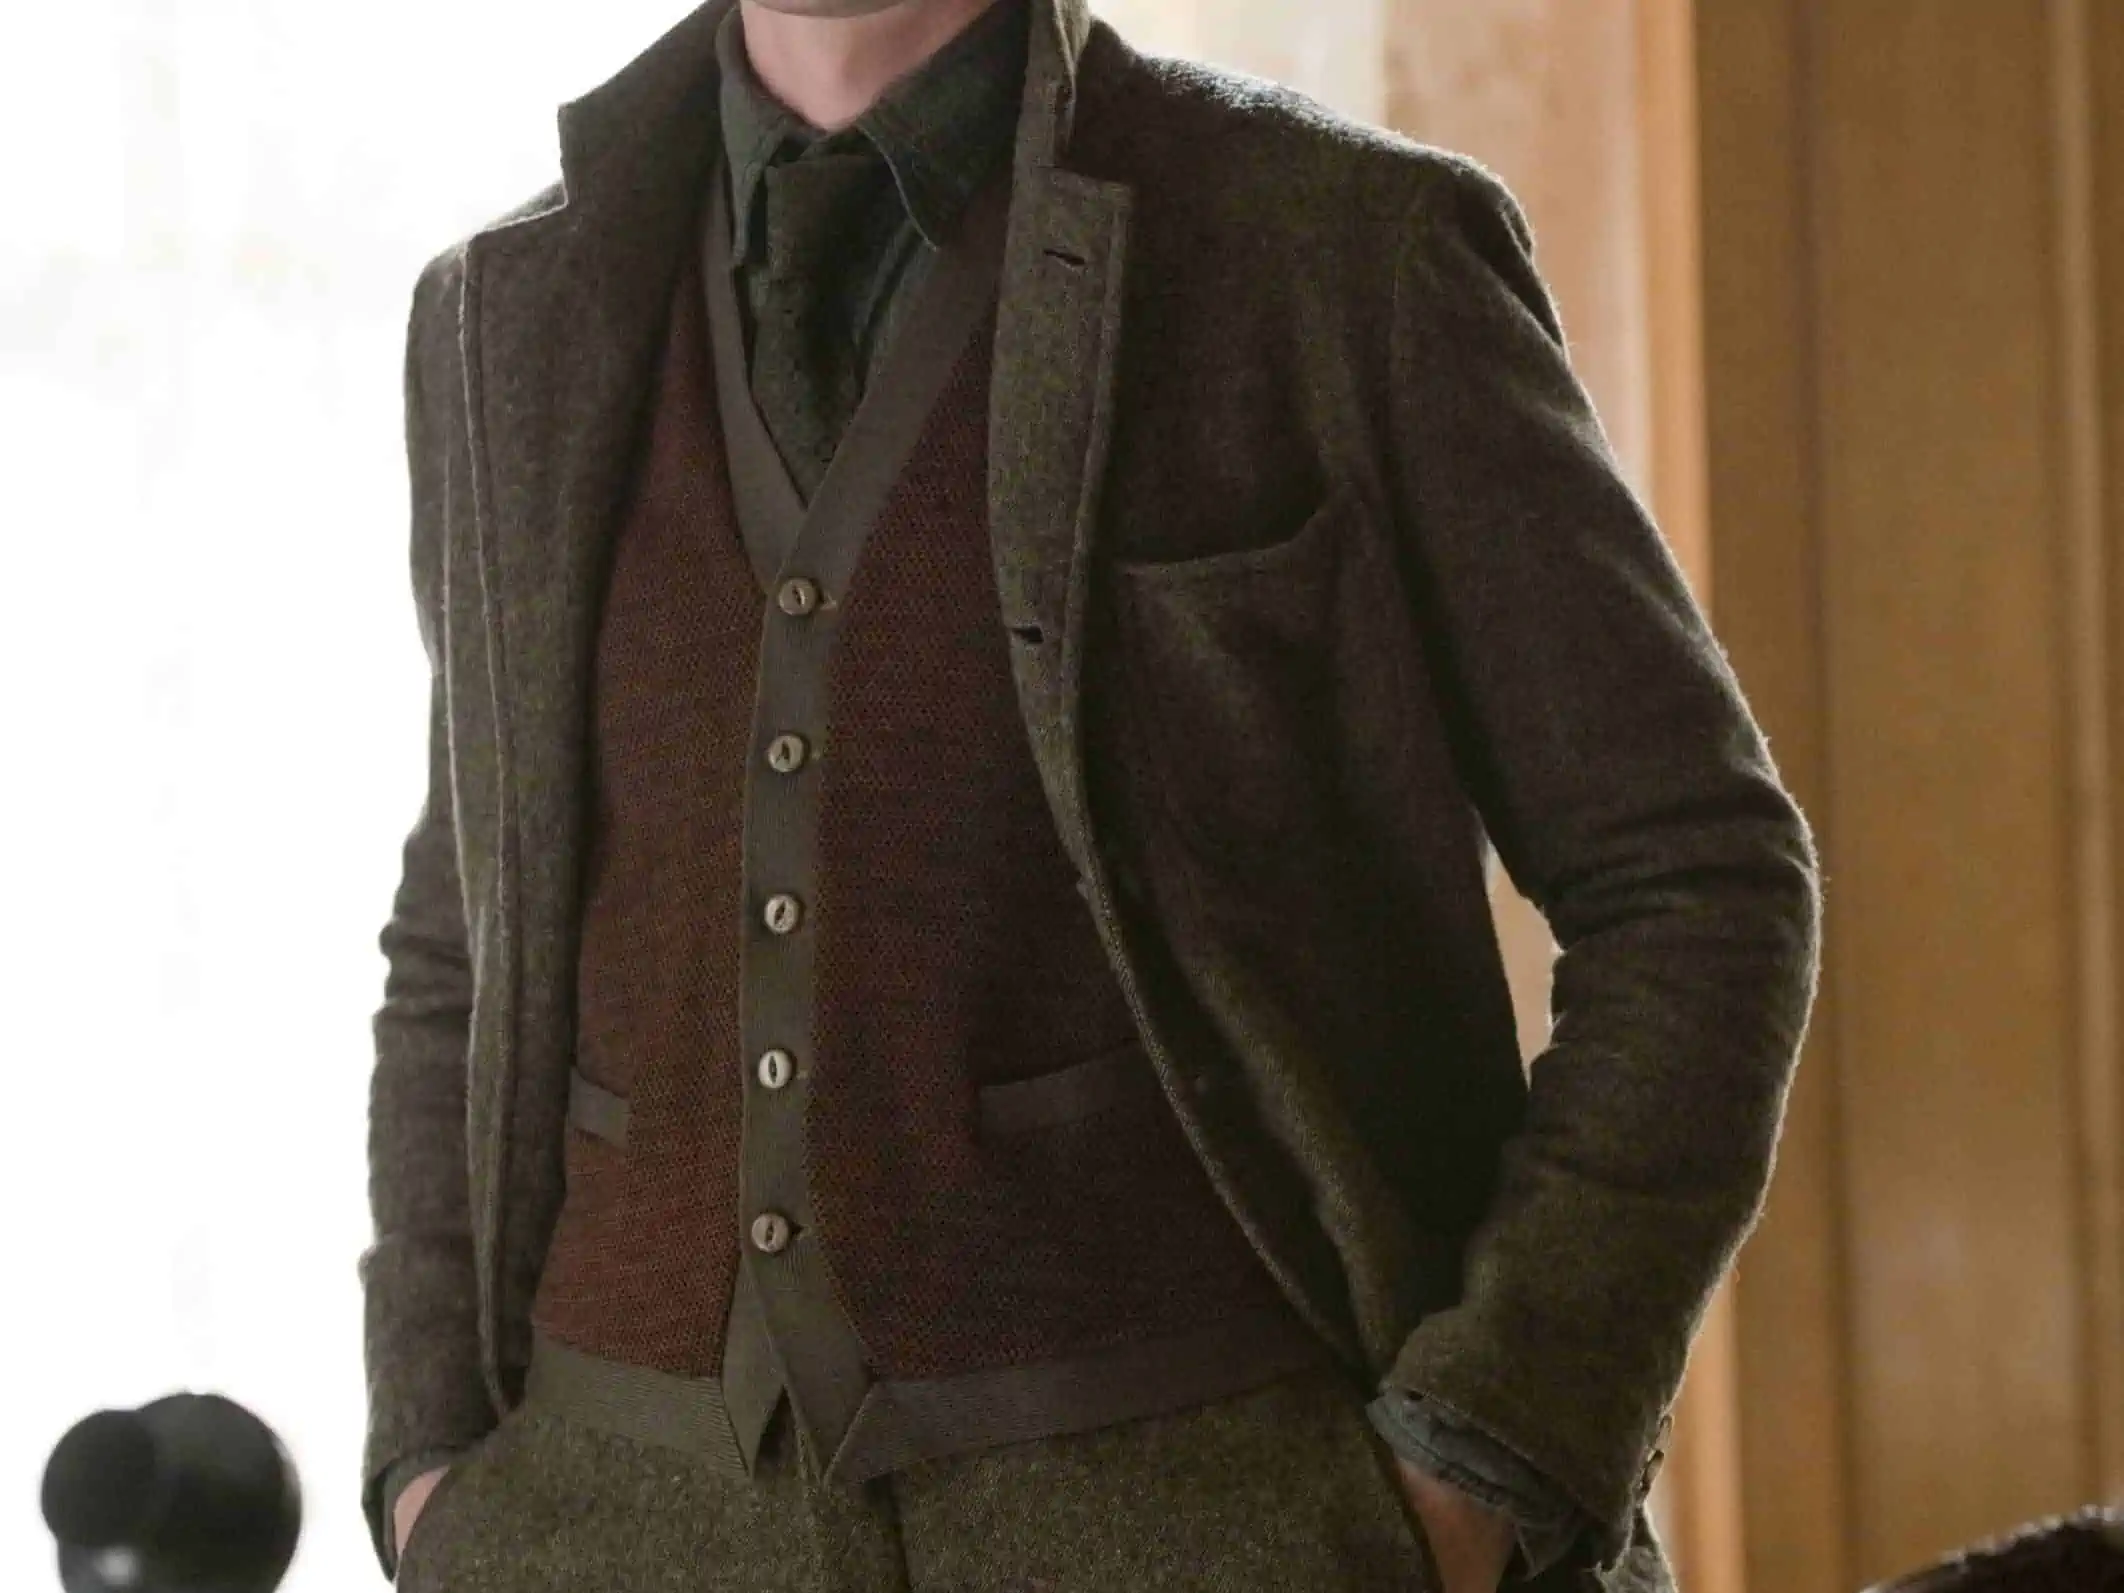 Darmody in Suit with Cardigan in Muted Dark Colors